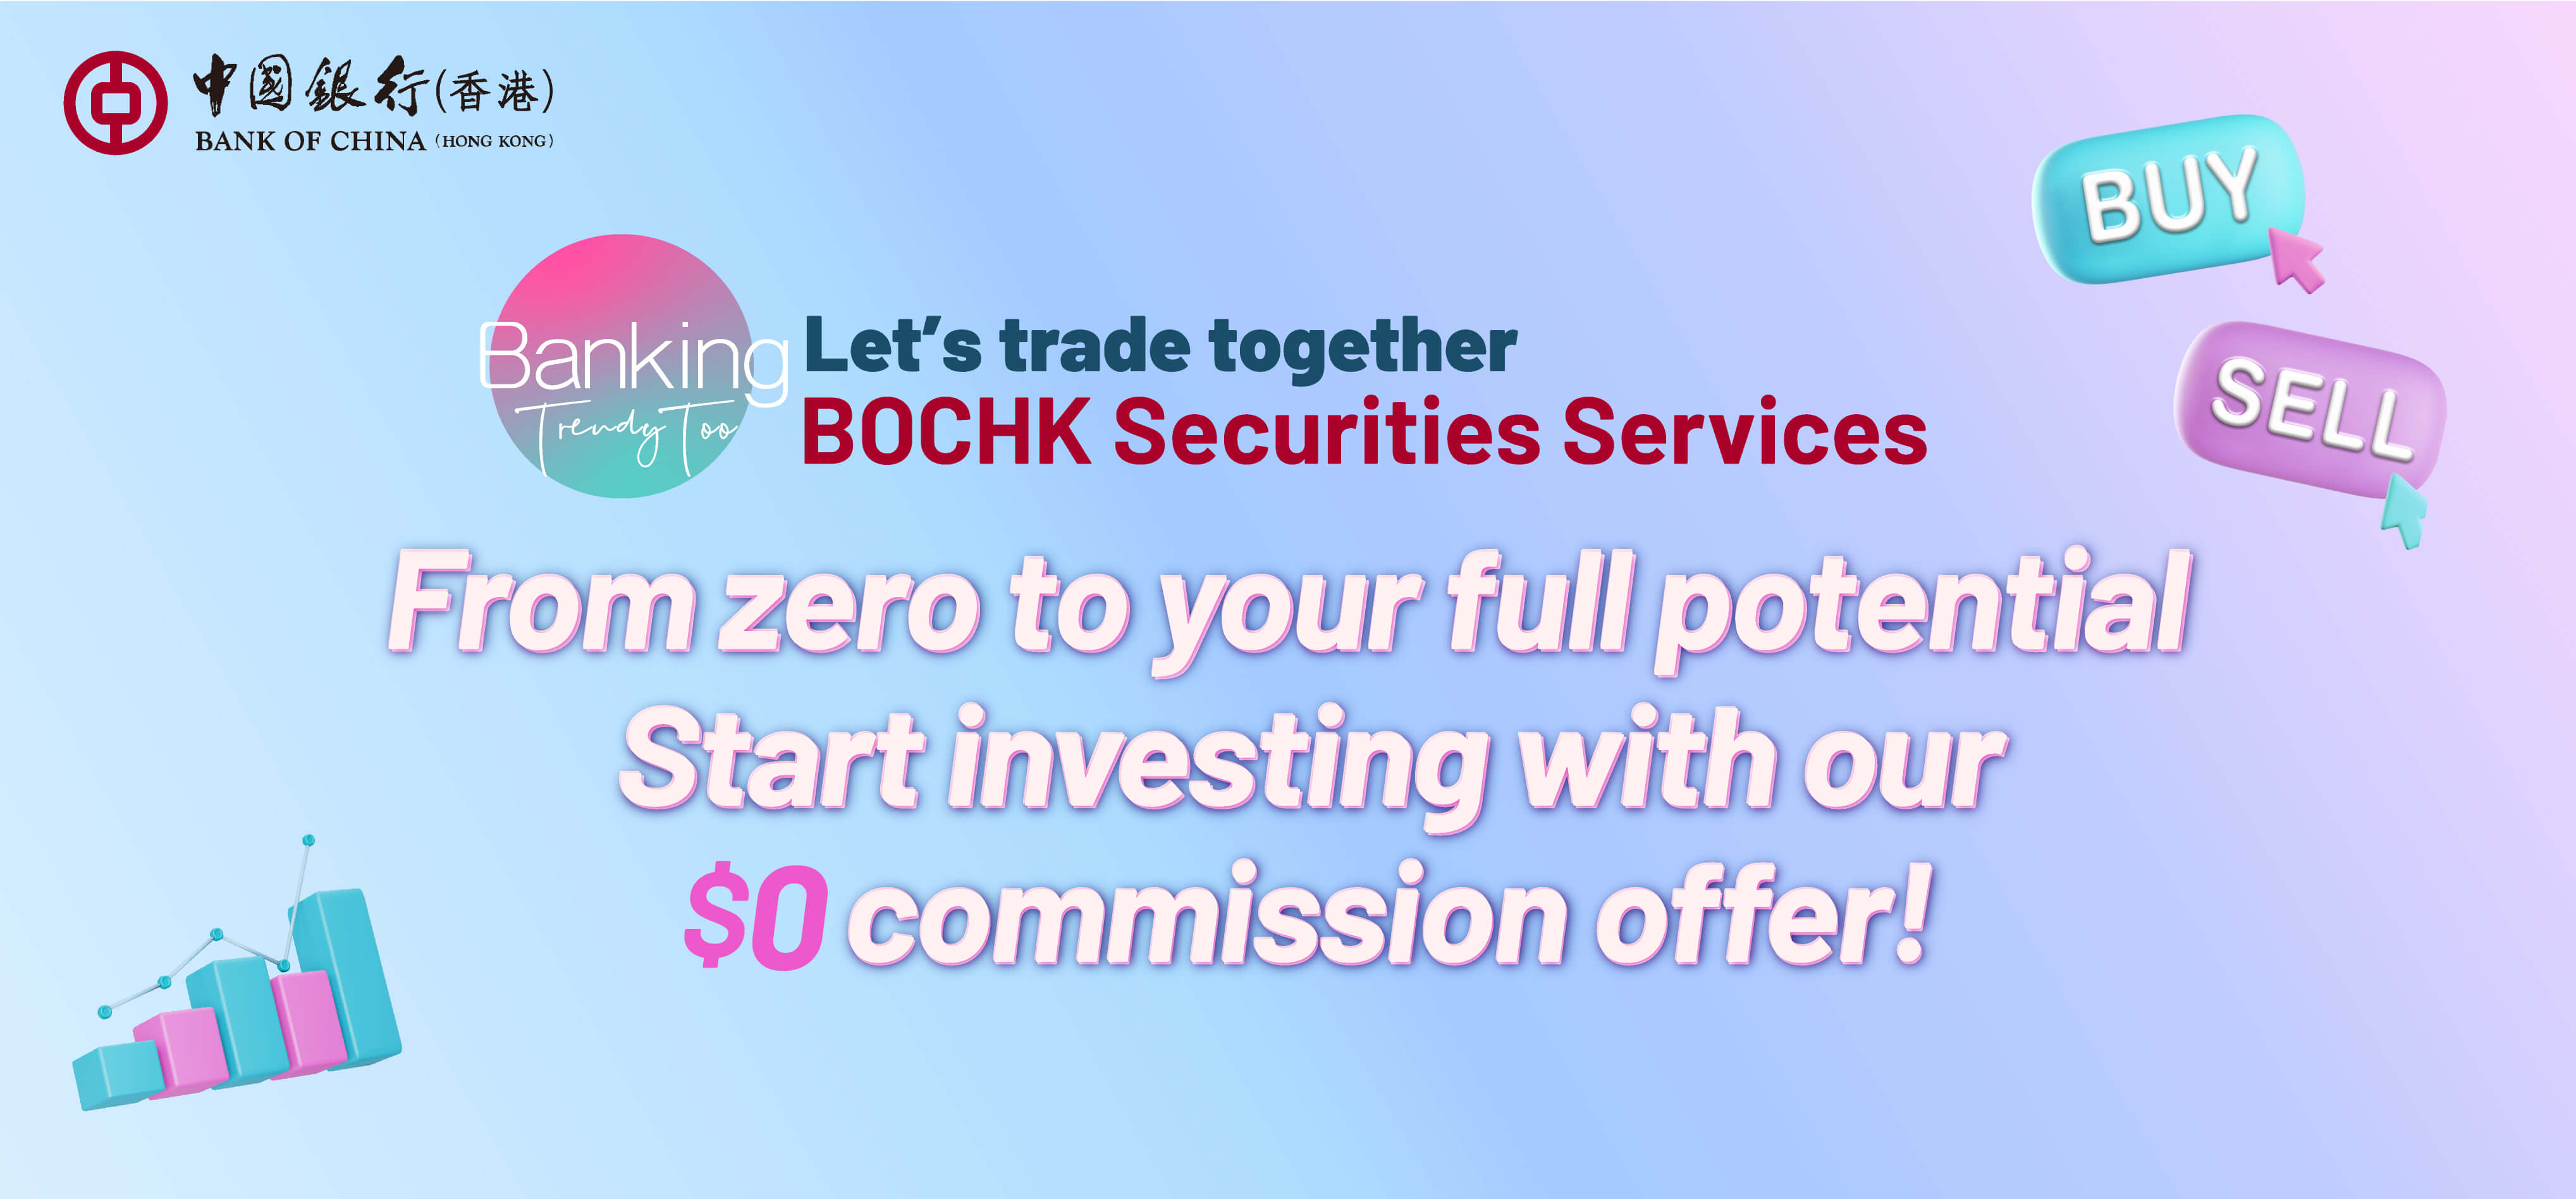 Let’s trade together BOCHK Securities Services From zero to your full potential Start investing with our $0 commission offer!